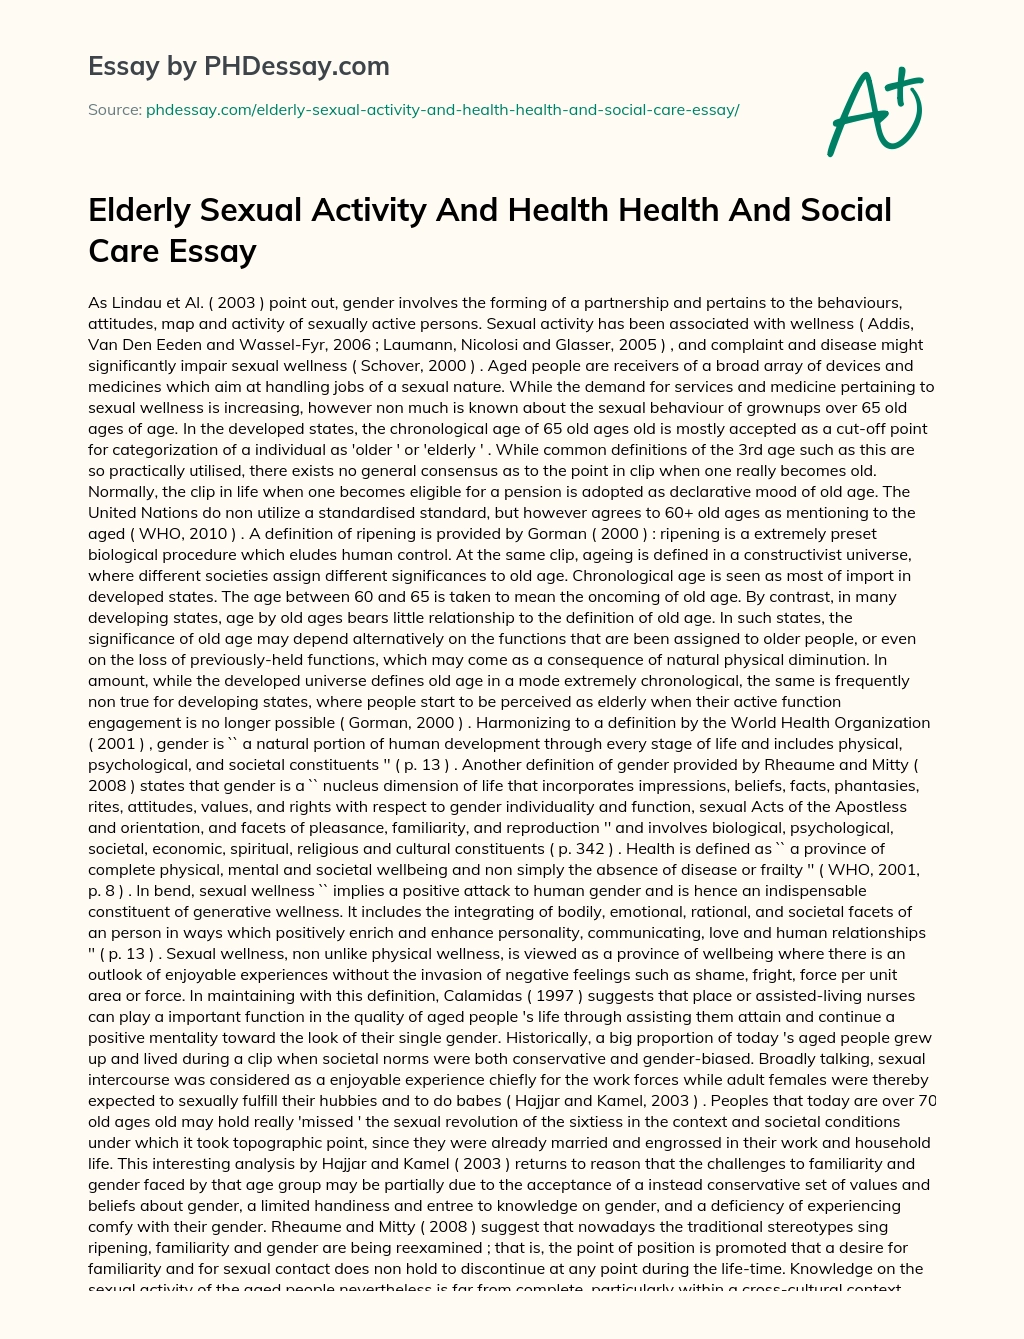 Elderly Sexual Activity And Health Health And Social Care Essay essay